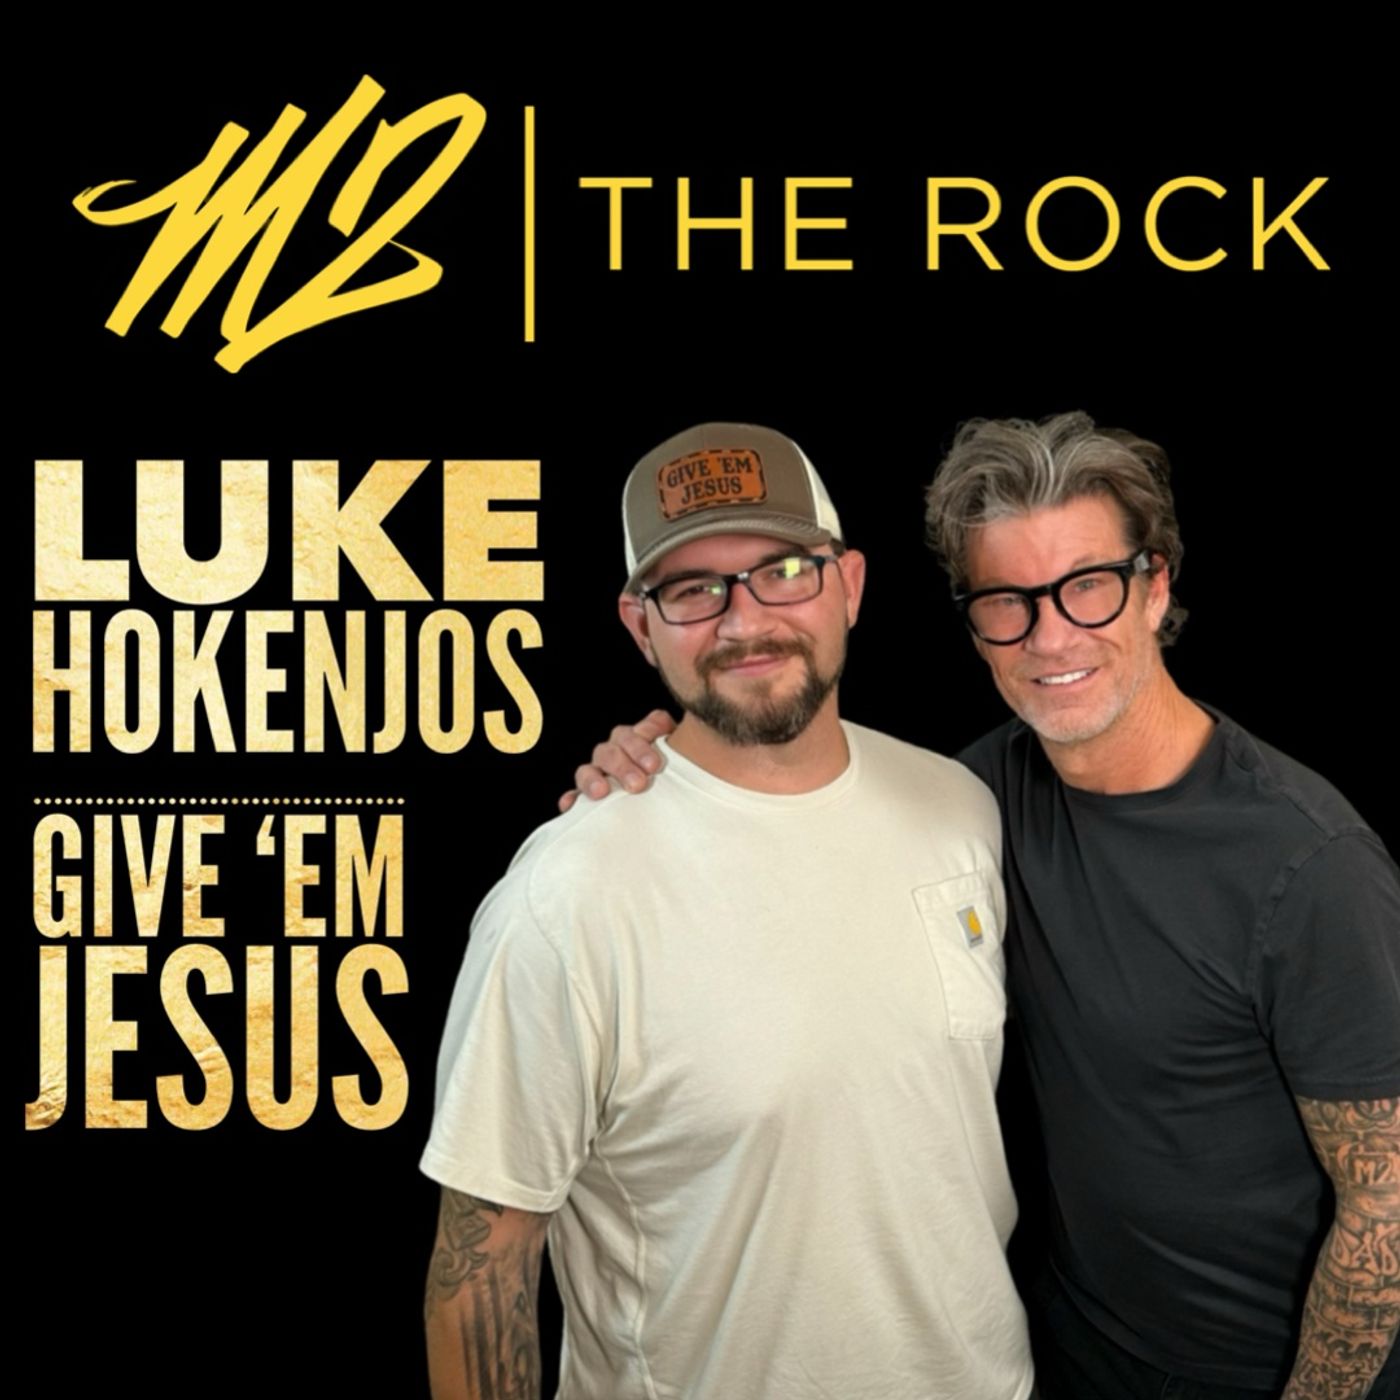 M2 THE ROCK with LUKE HOKENJOS of GIVE 'EM JESUS